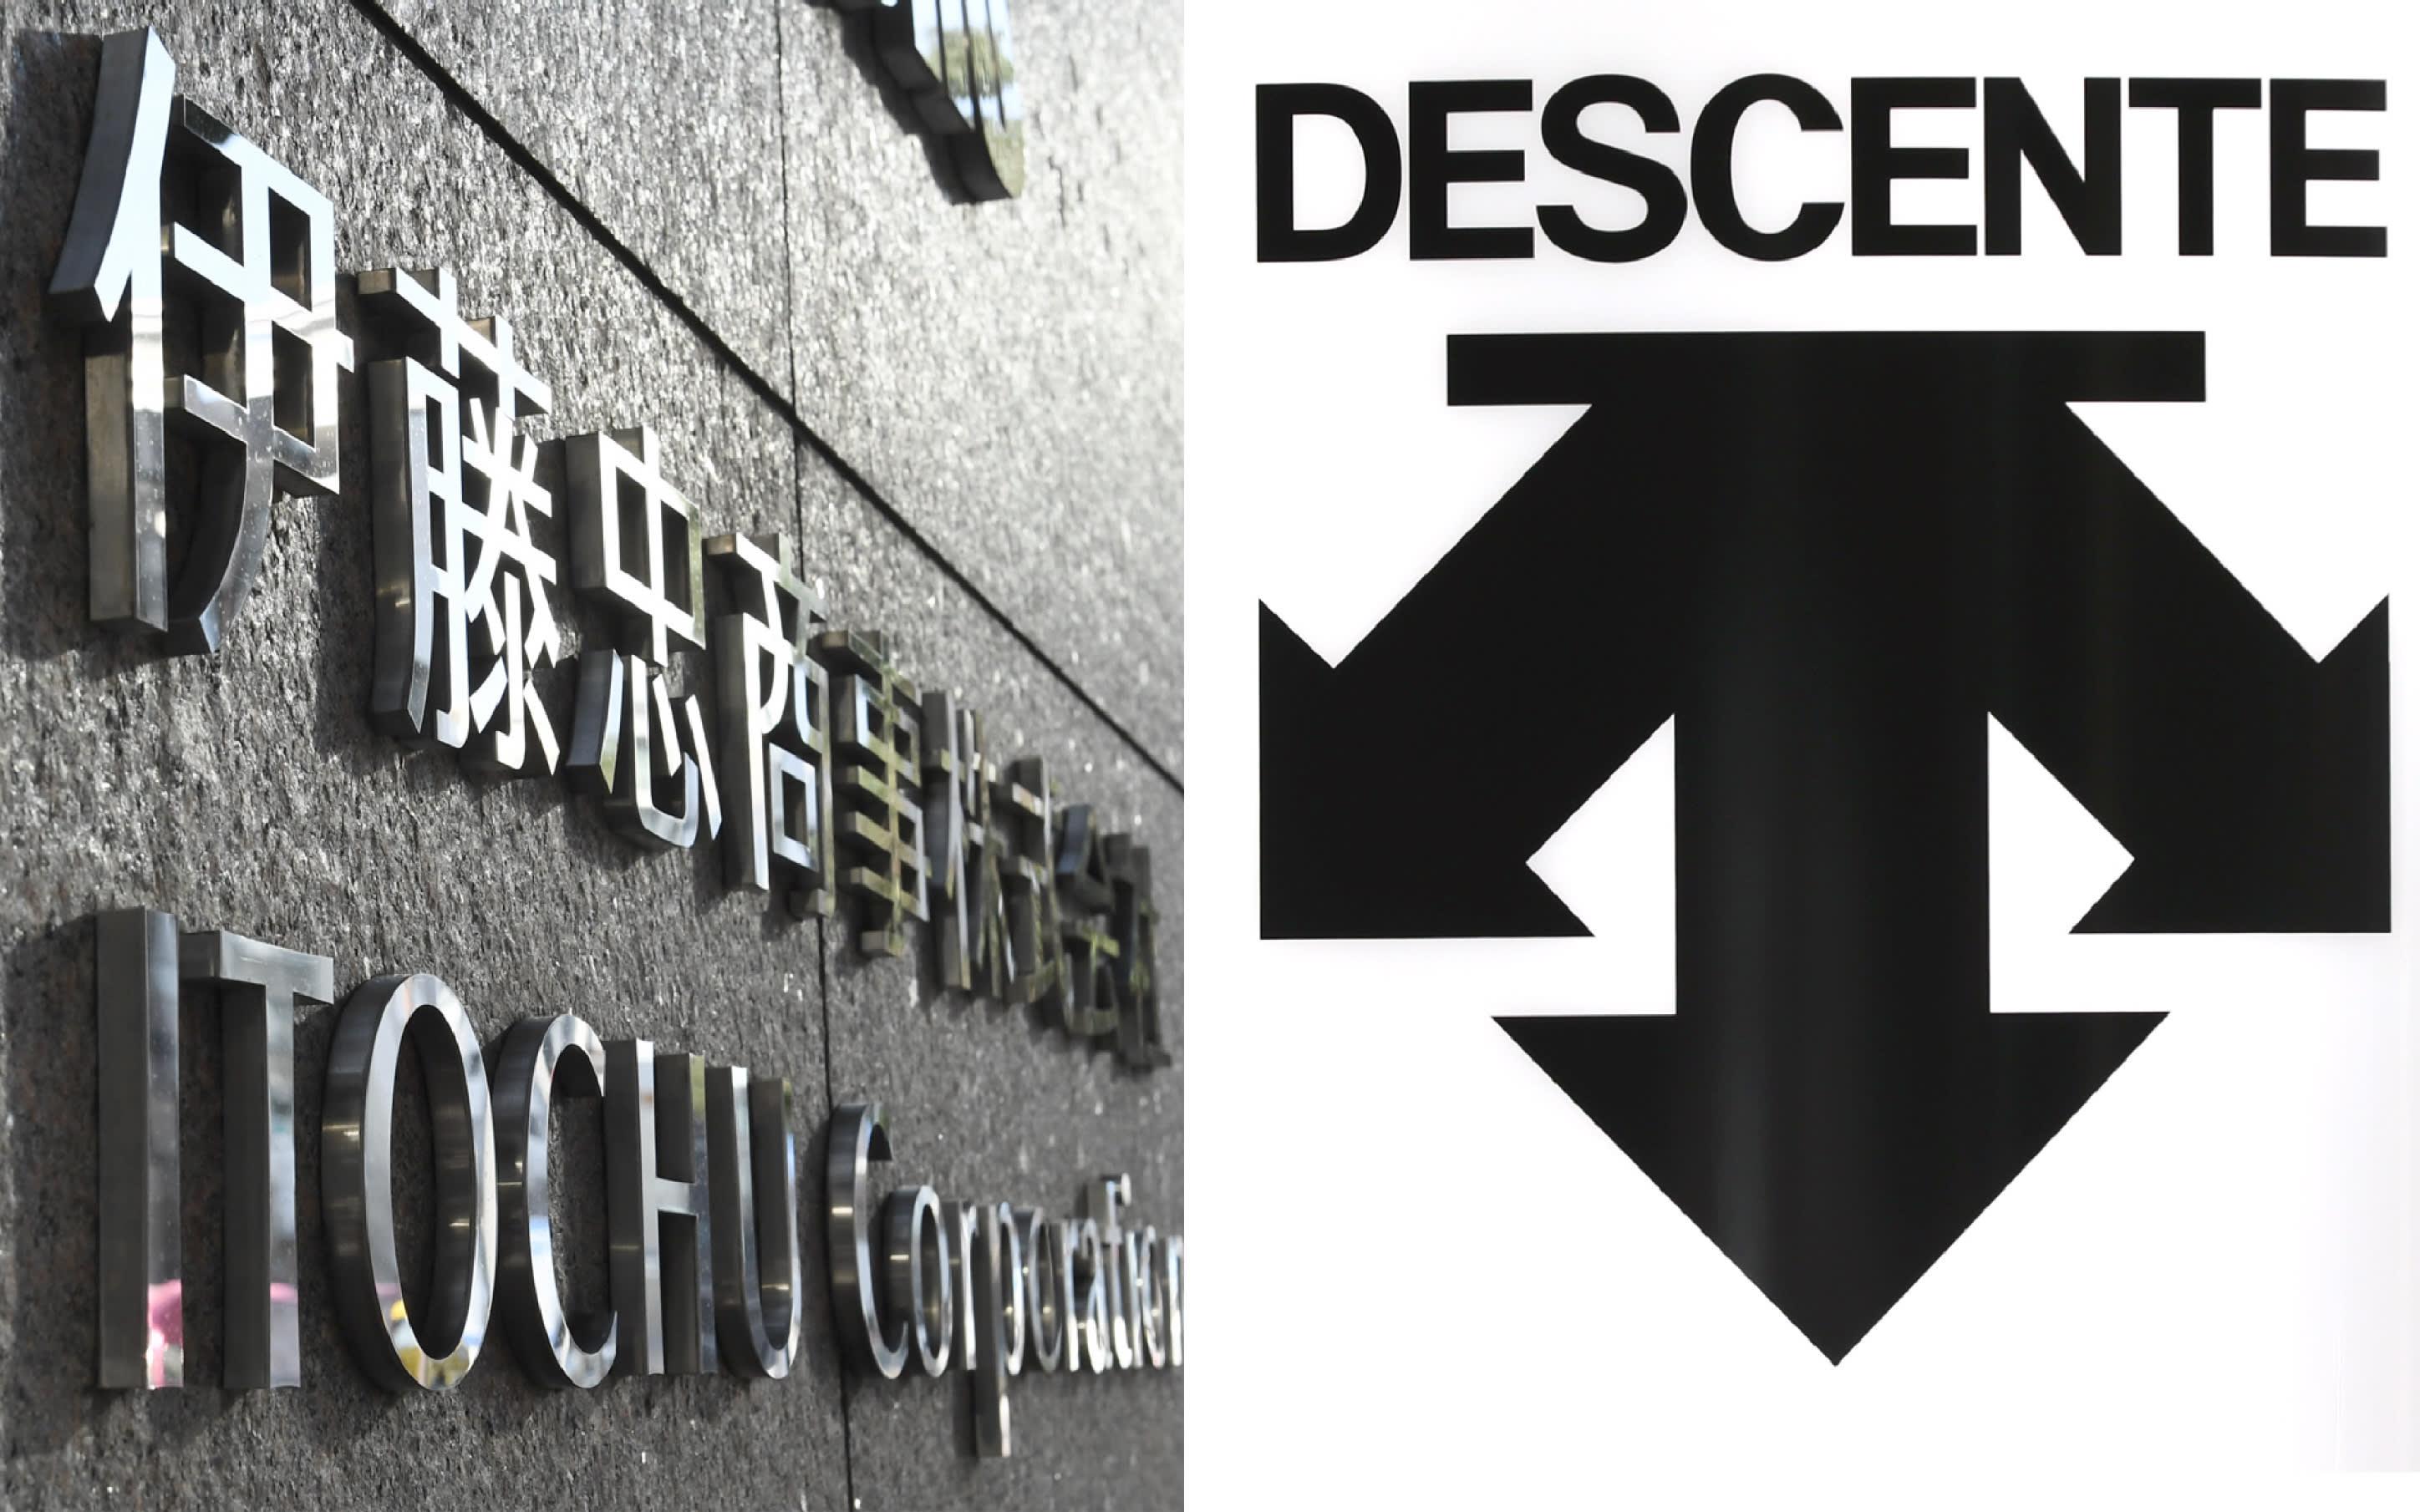 Descente Logo - Itochu caps off takeover of Descente with change in president